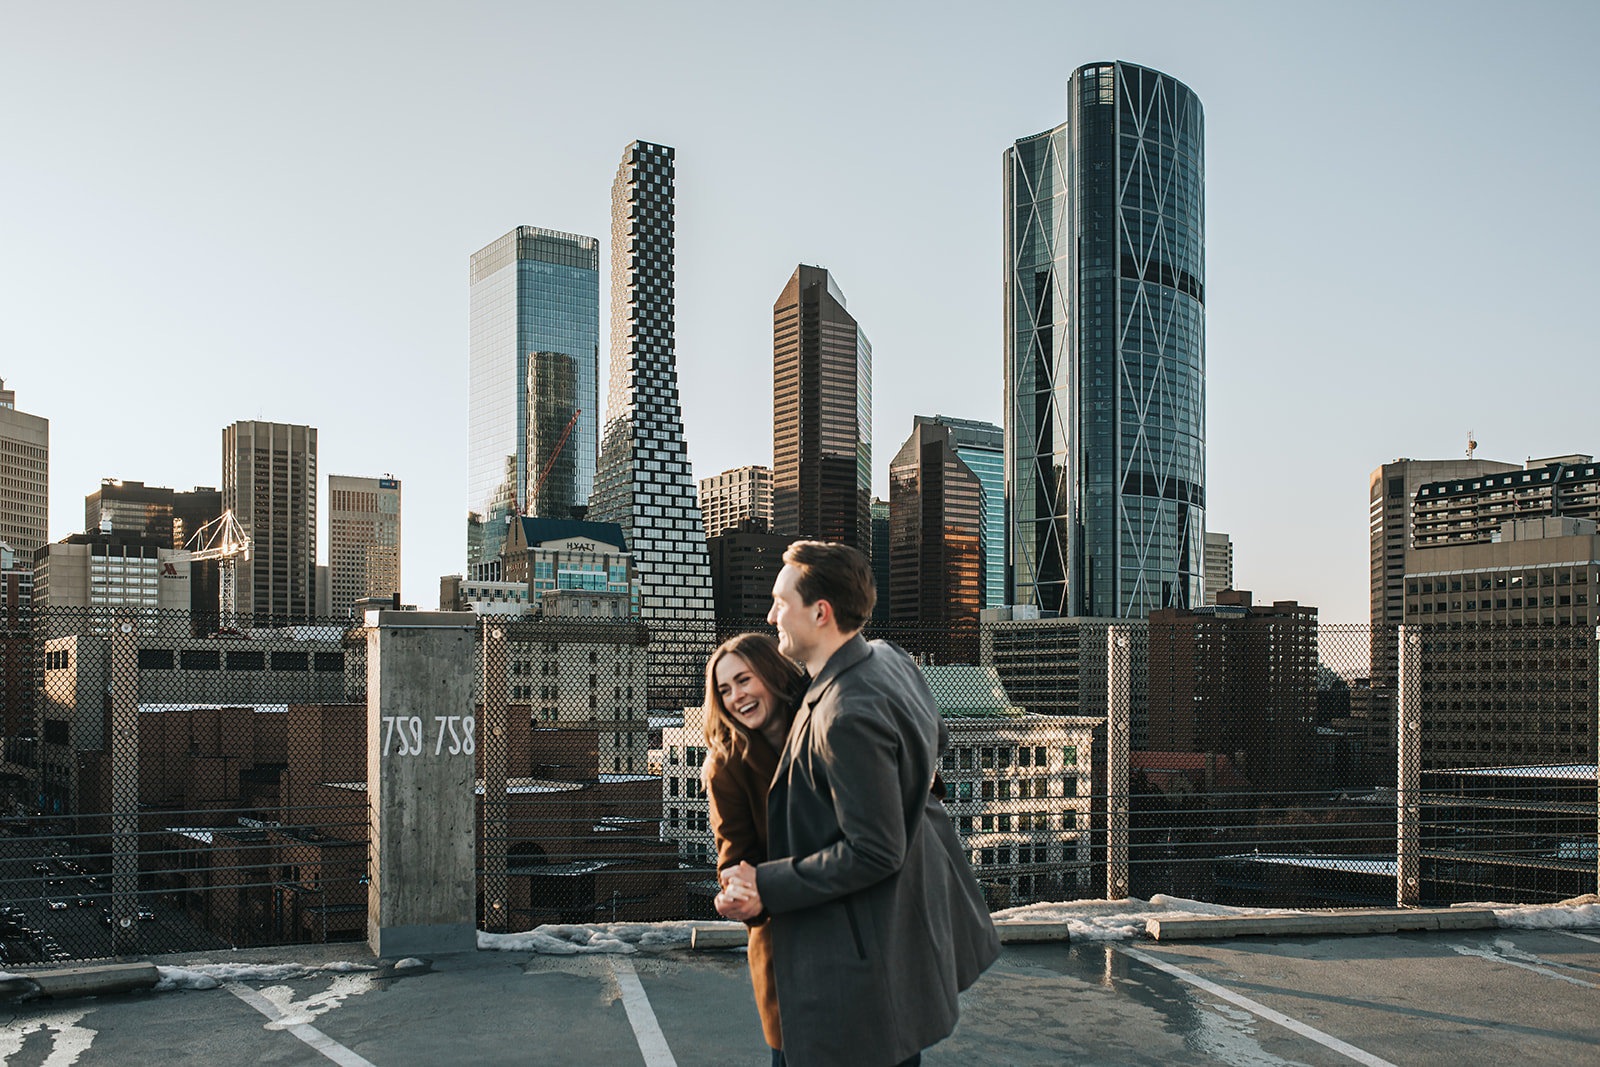 Calgary City Vibes for Michelle + Thomas's Urban Engagement Session